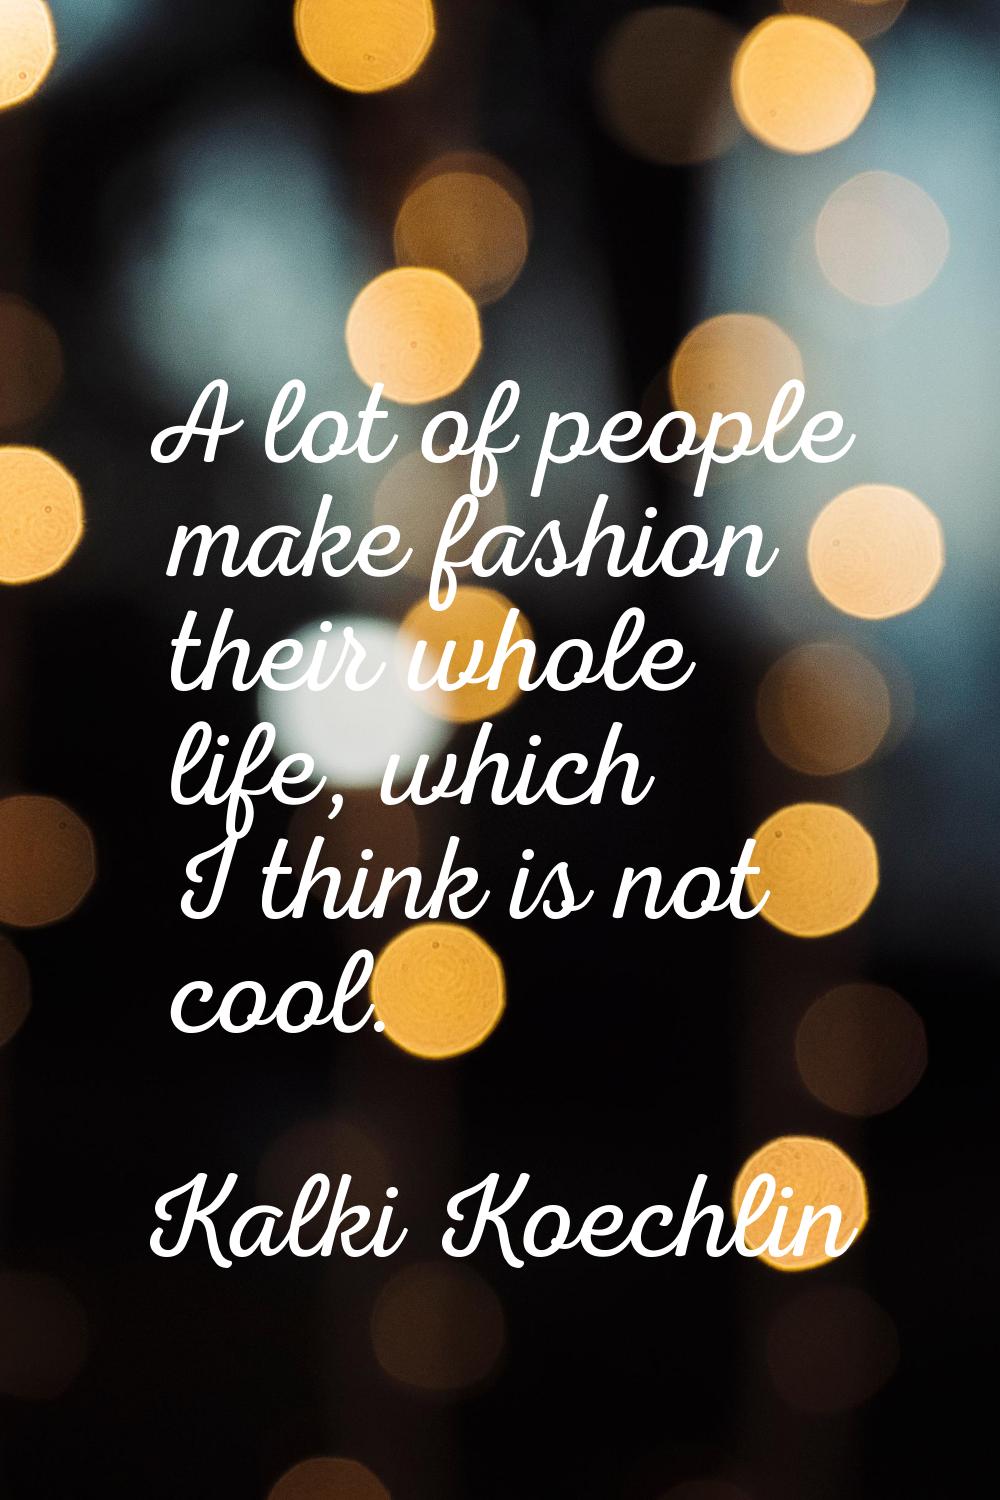 A lot of people make fashion their whole life, which I think is not cool.